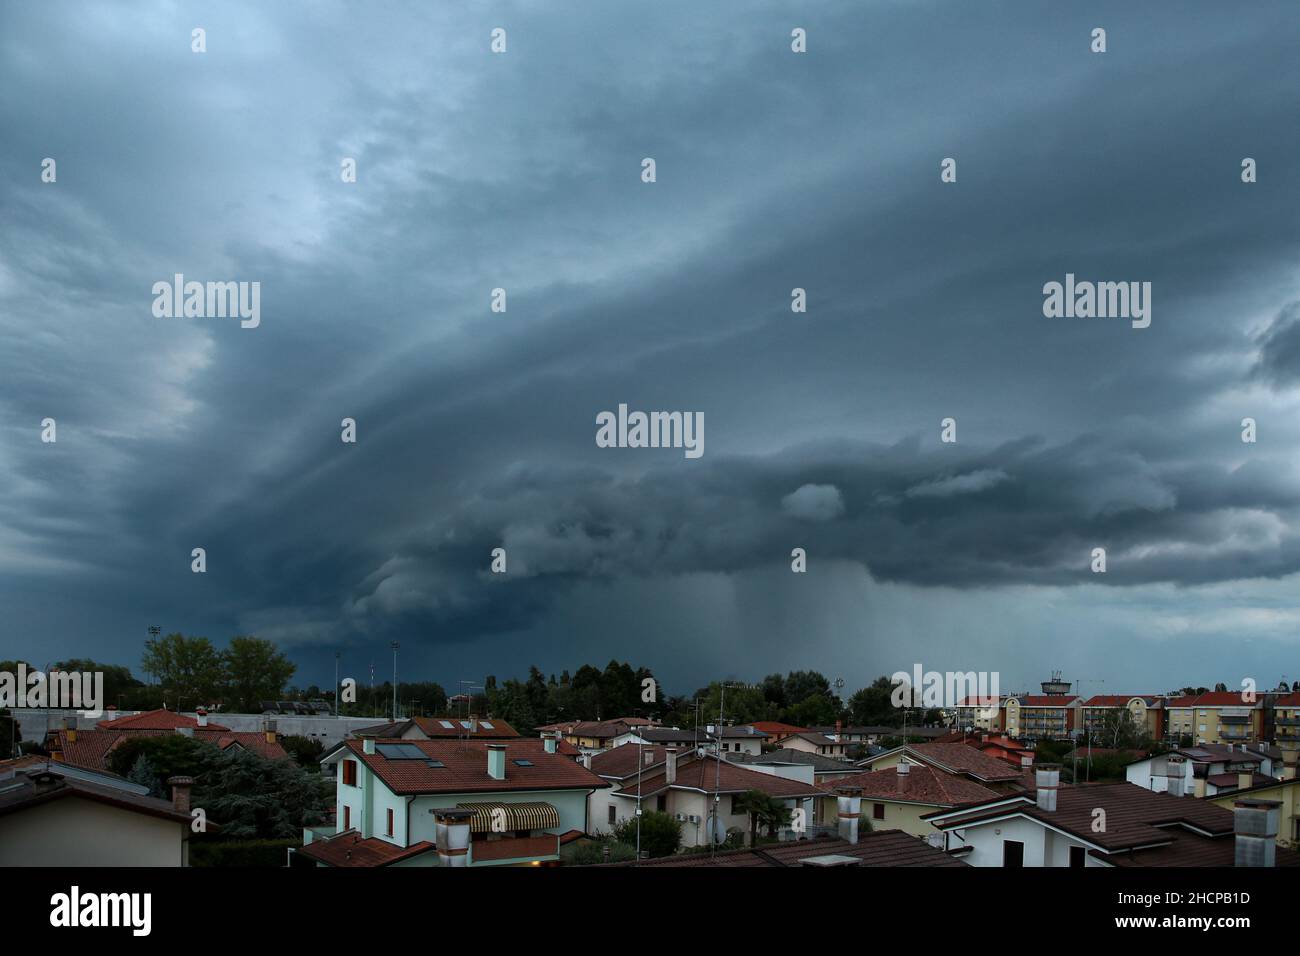 Shelfcloud during a storm Stock Photo